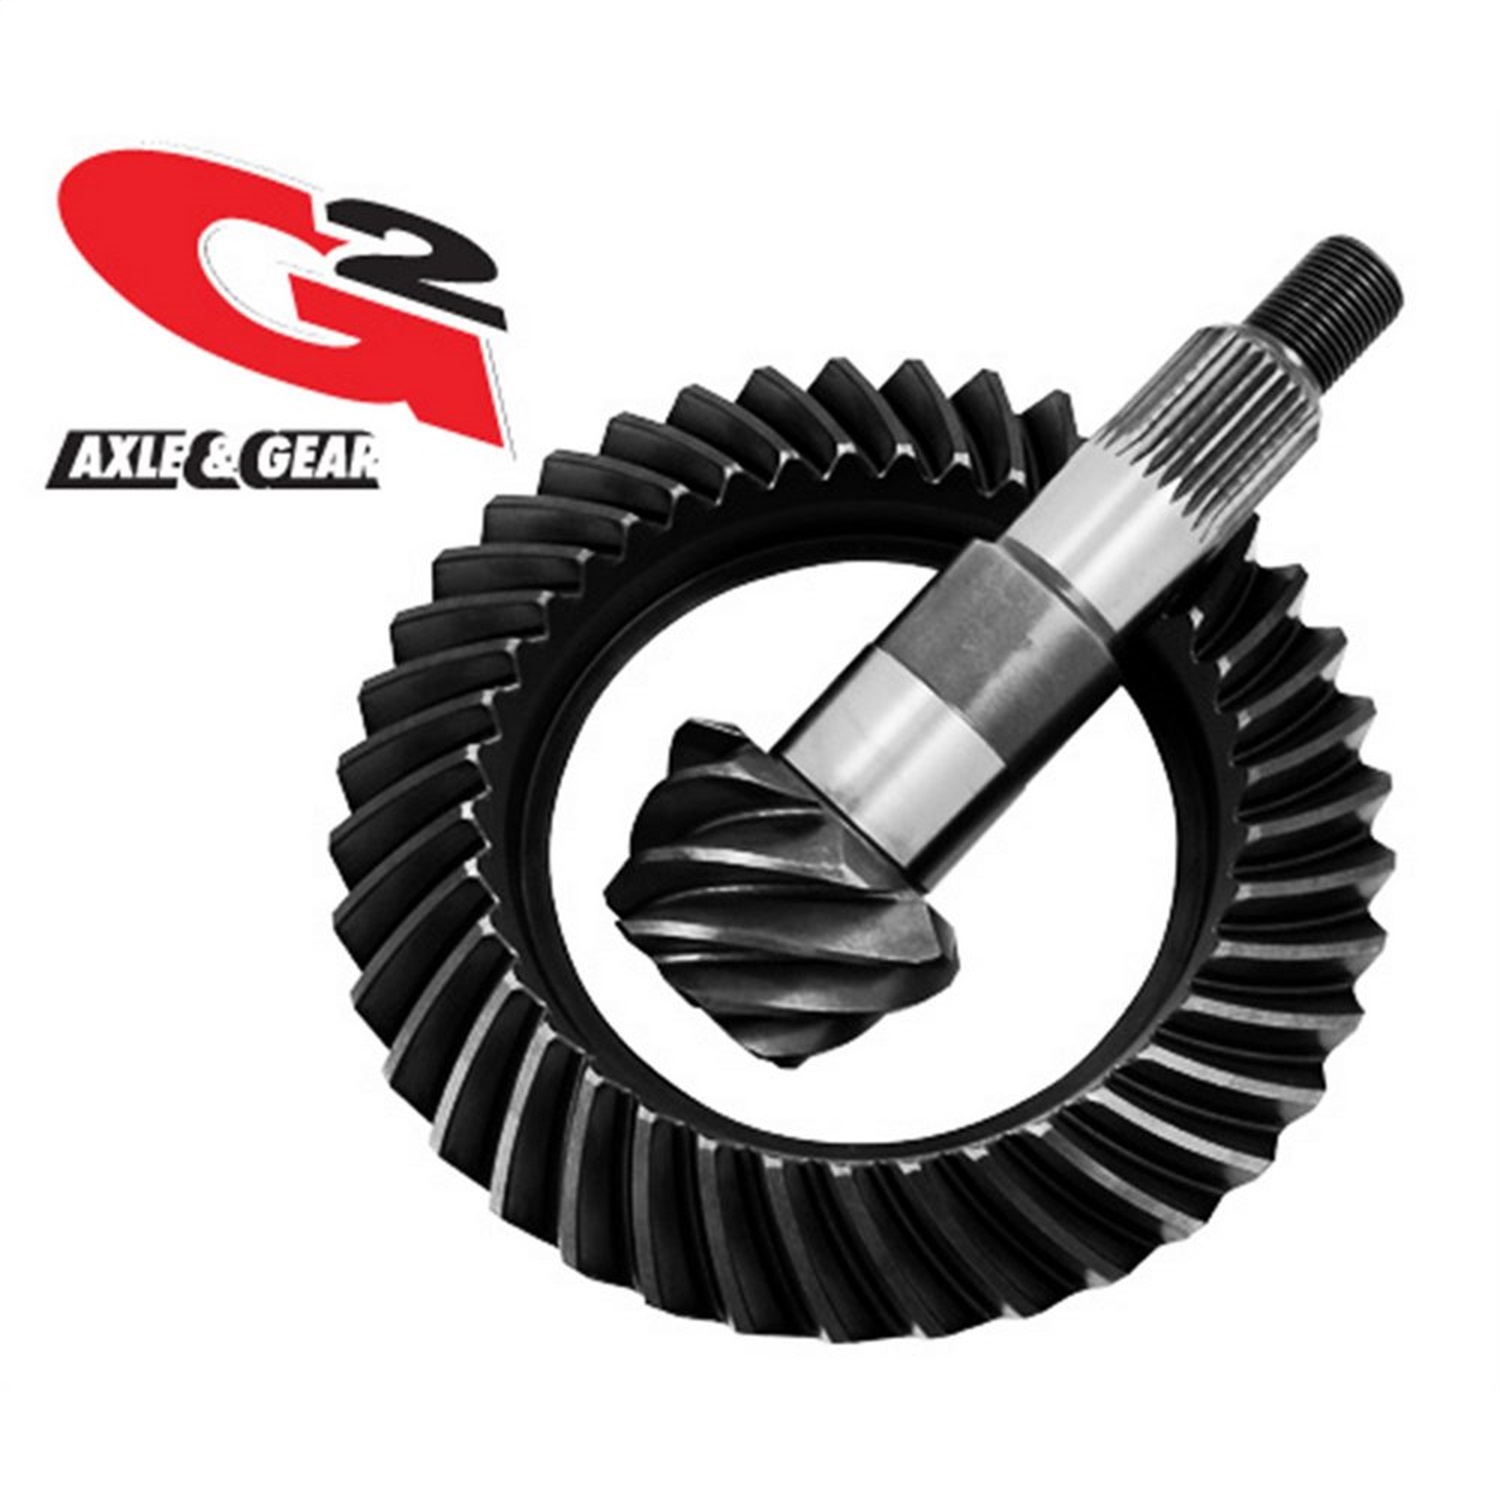 G2 Axle and Gear 2-2025-331 Ring and Pinion Set